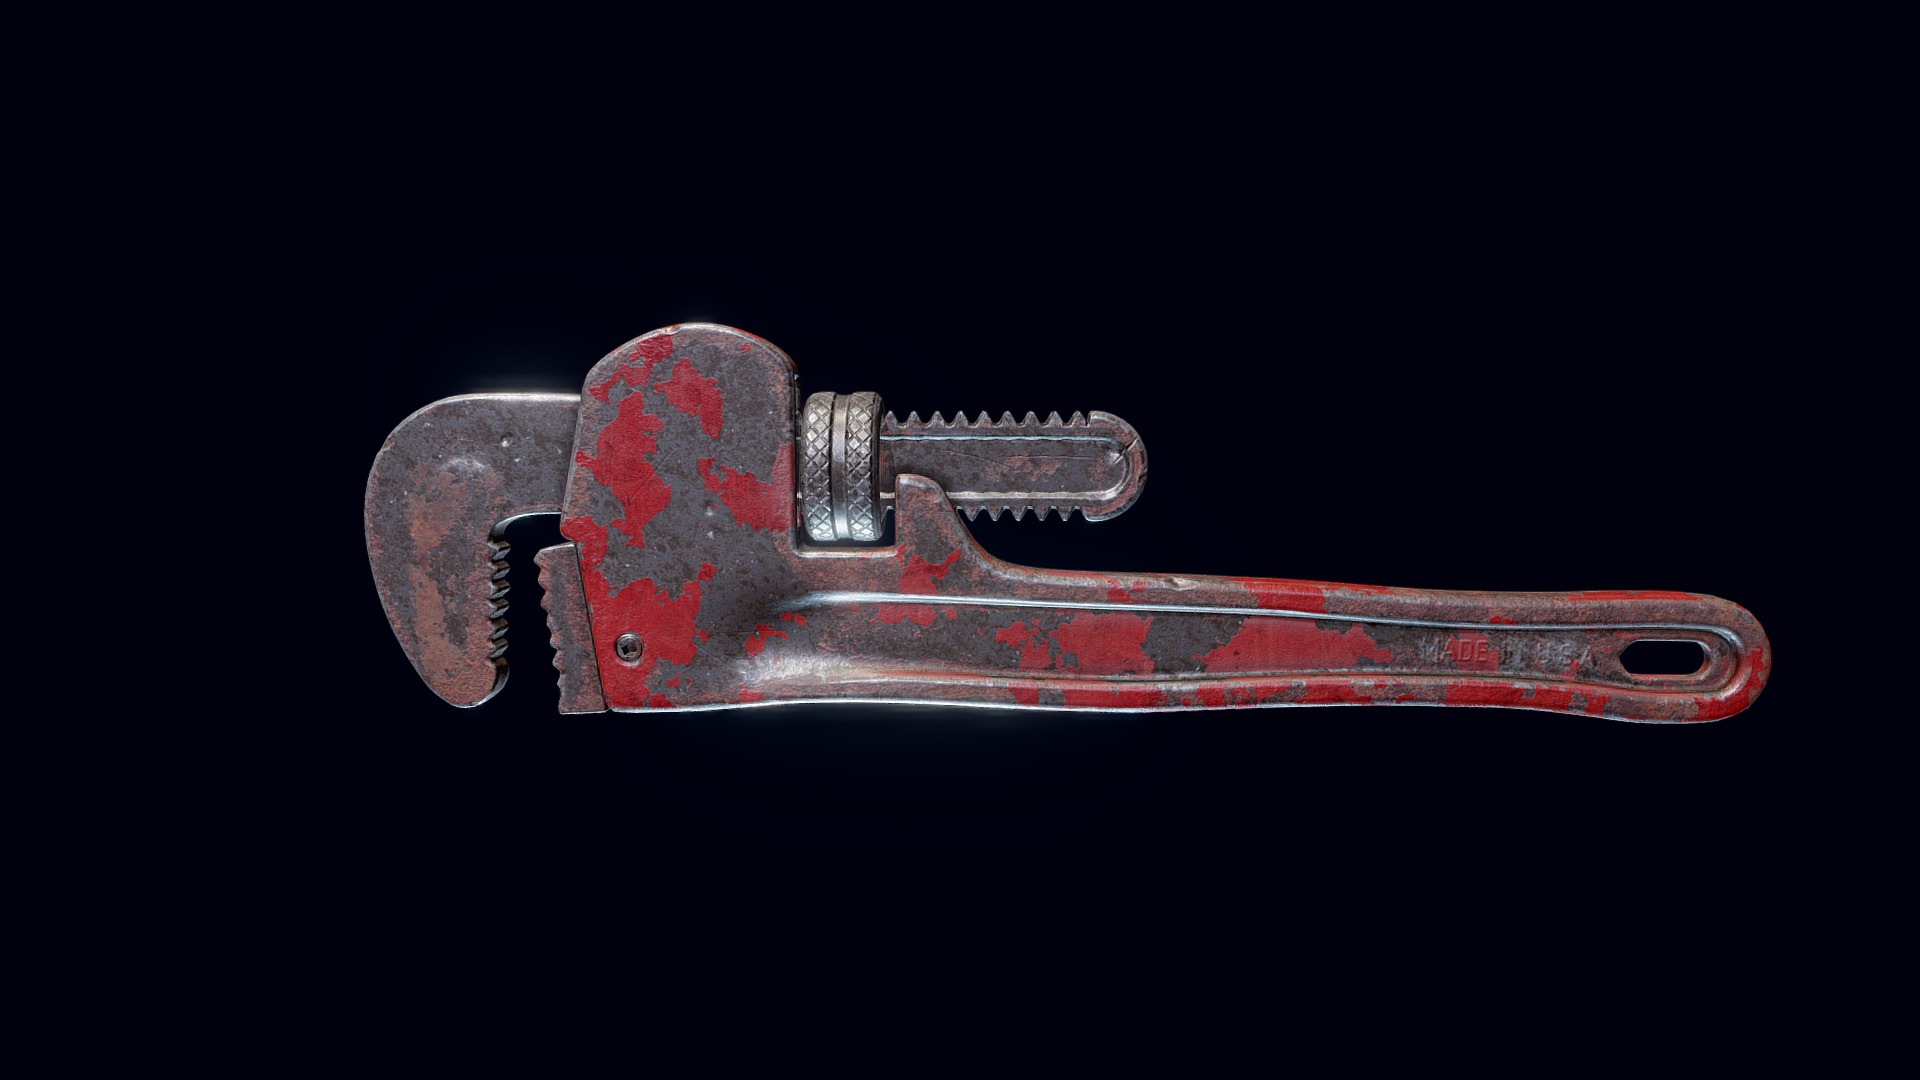 Another 3D model, this time is the old pipe wrench. I tried to achieve more realistic textures. Modeling - Maya and Zrush, texturing - Substance Painter, rendering - Marmoset Toolbag.
The model has 4K maps for both PBR workflows: Metal/Roughness and Specular/Glossiness.
I will be glad to hear criticism and suggestions.
Thank you for watching! - Old Pipe Wrench - Download Free 3D model by bordiug 3d model